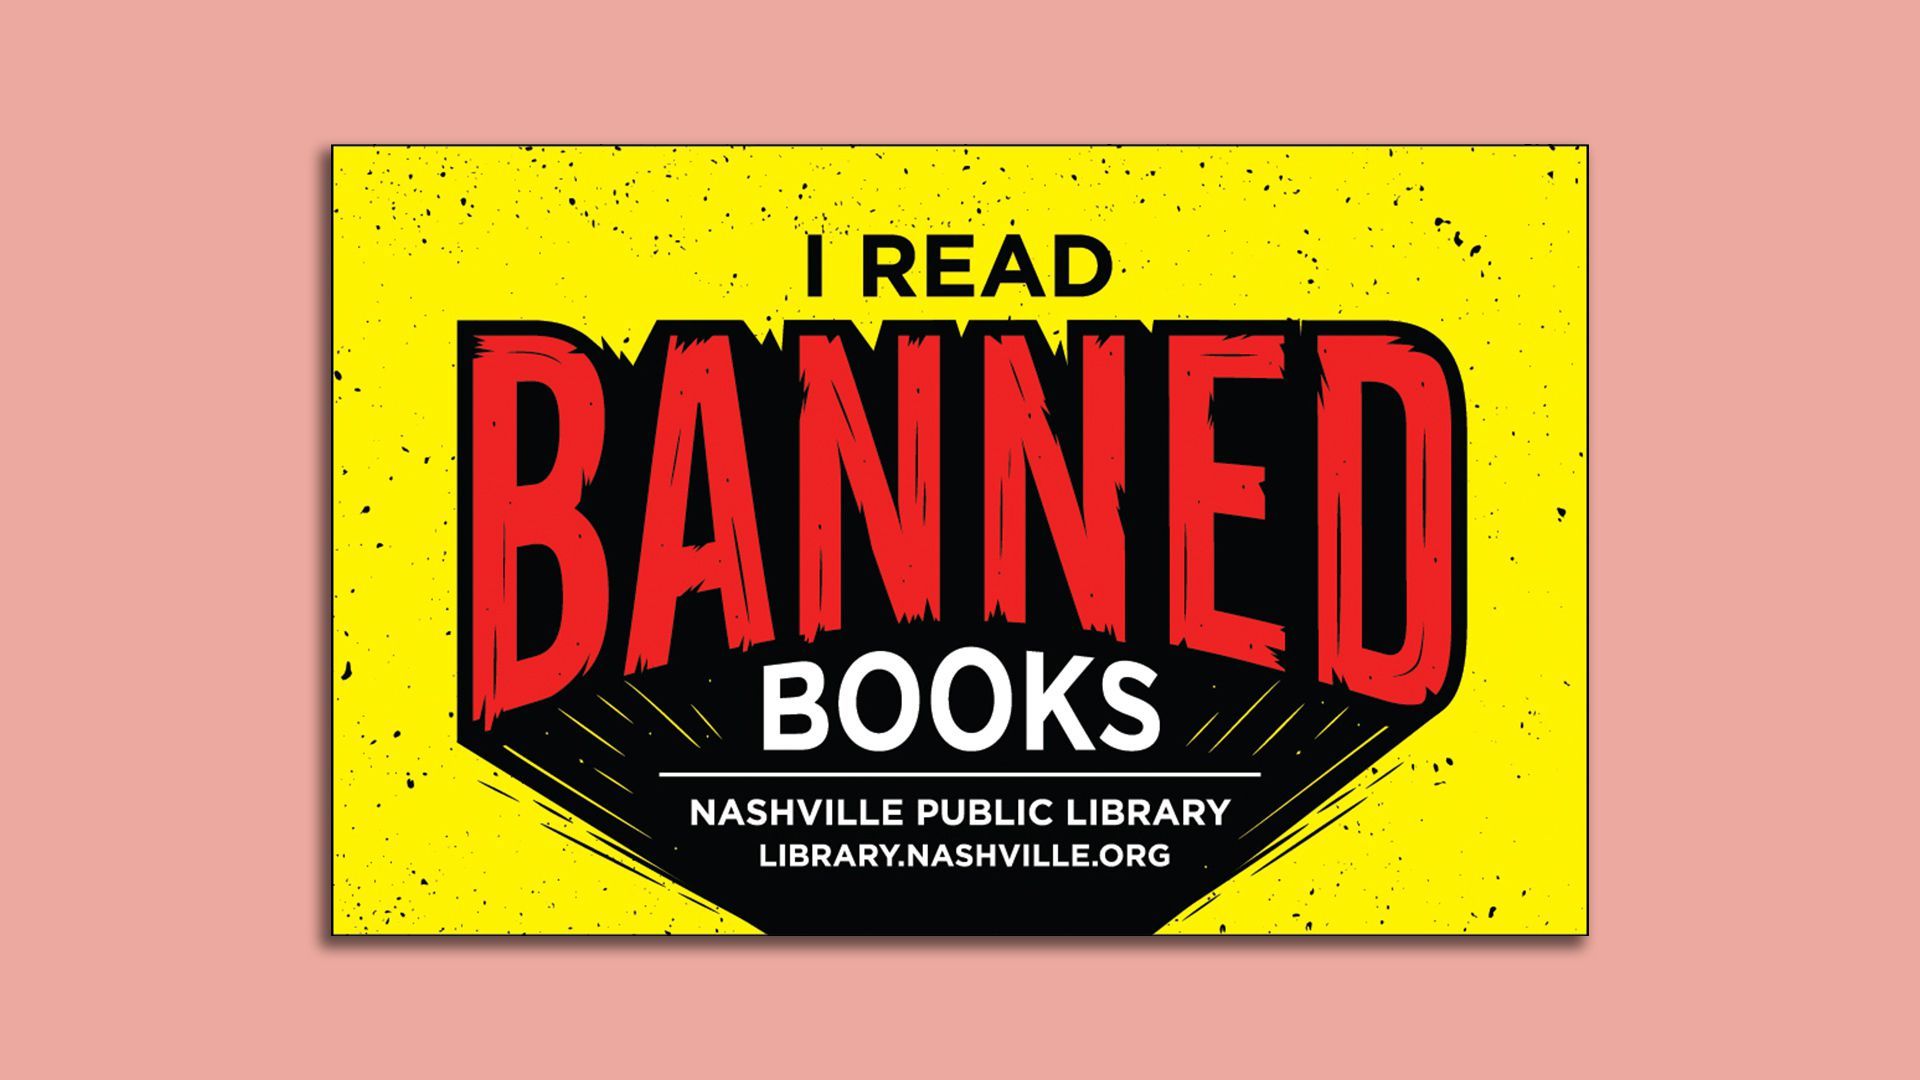 image of a banner that reads "I read banned books: Nashville Public Library"